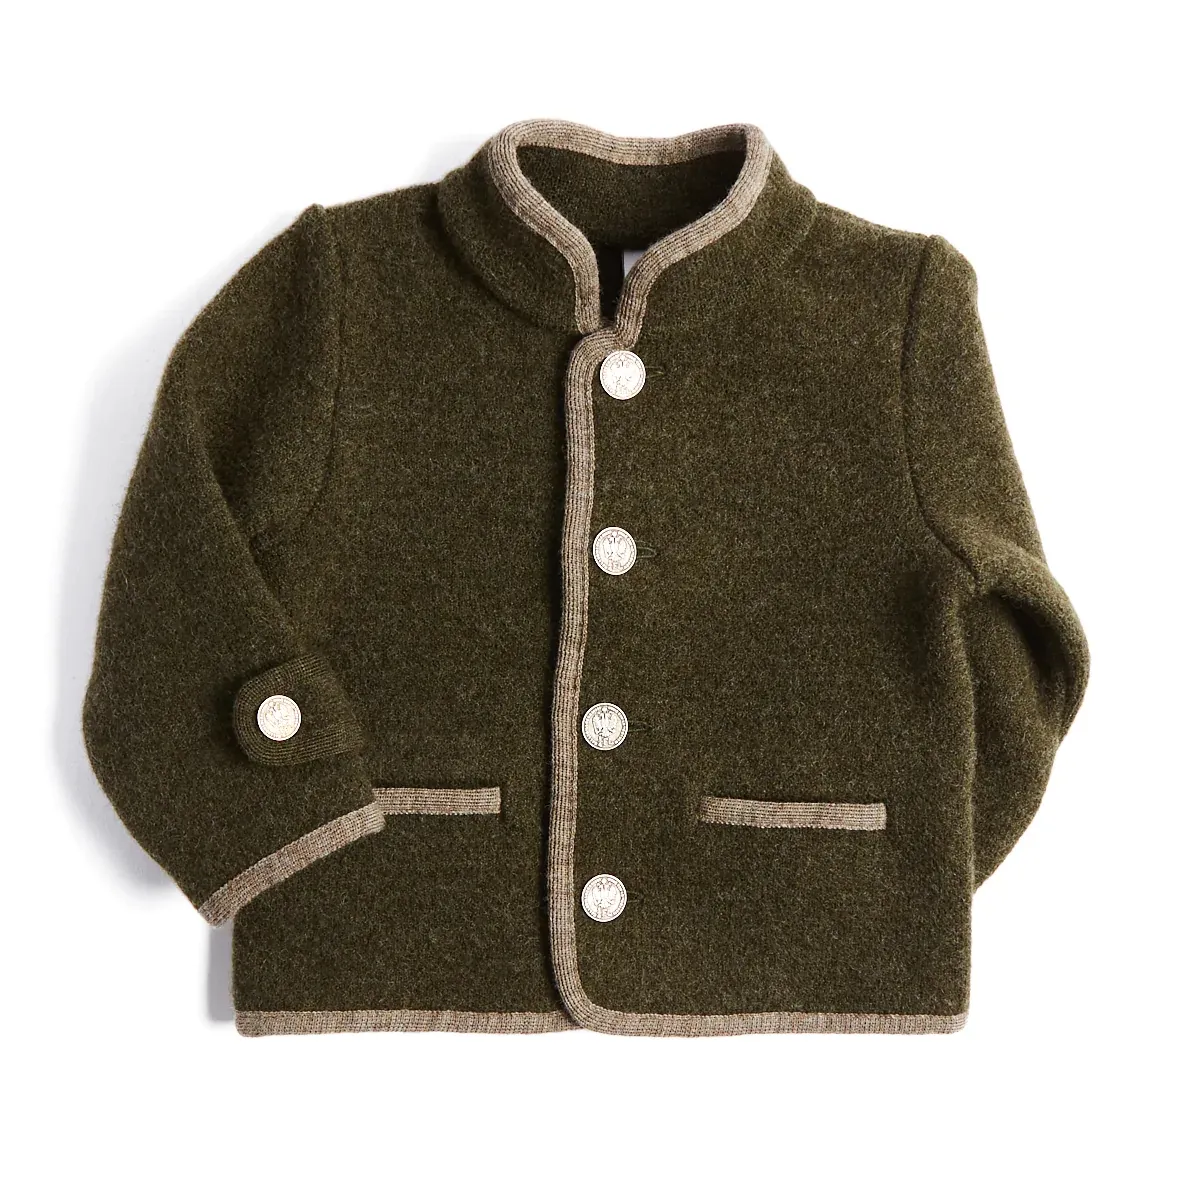 Children Classic Wool Jacket with Trim Boys Girls Autumn Winter Outwear Coats Kids Spanish Boutique Clothes